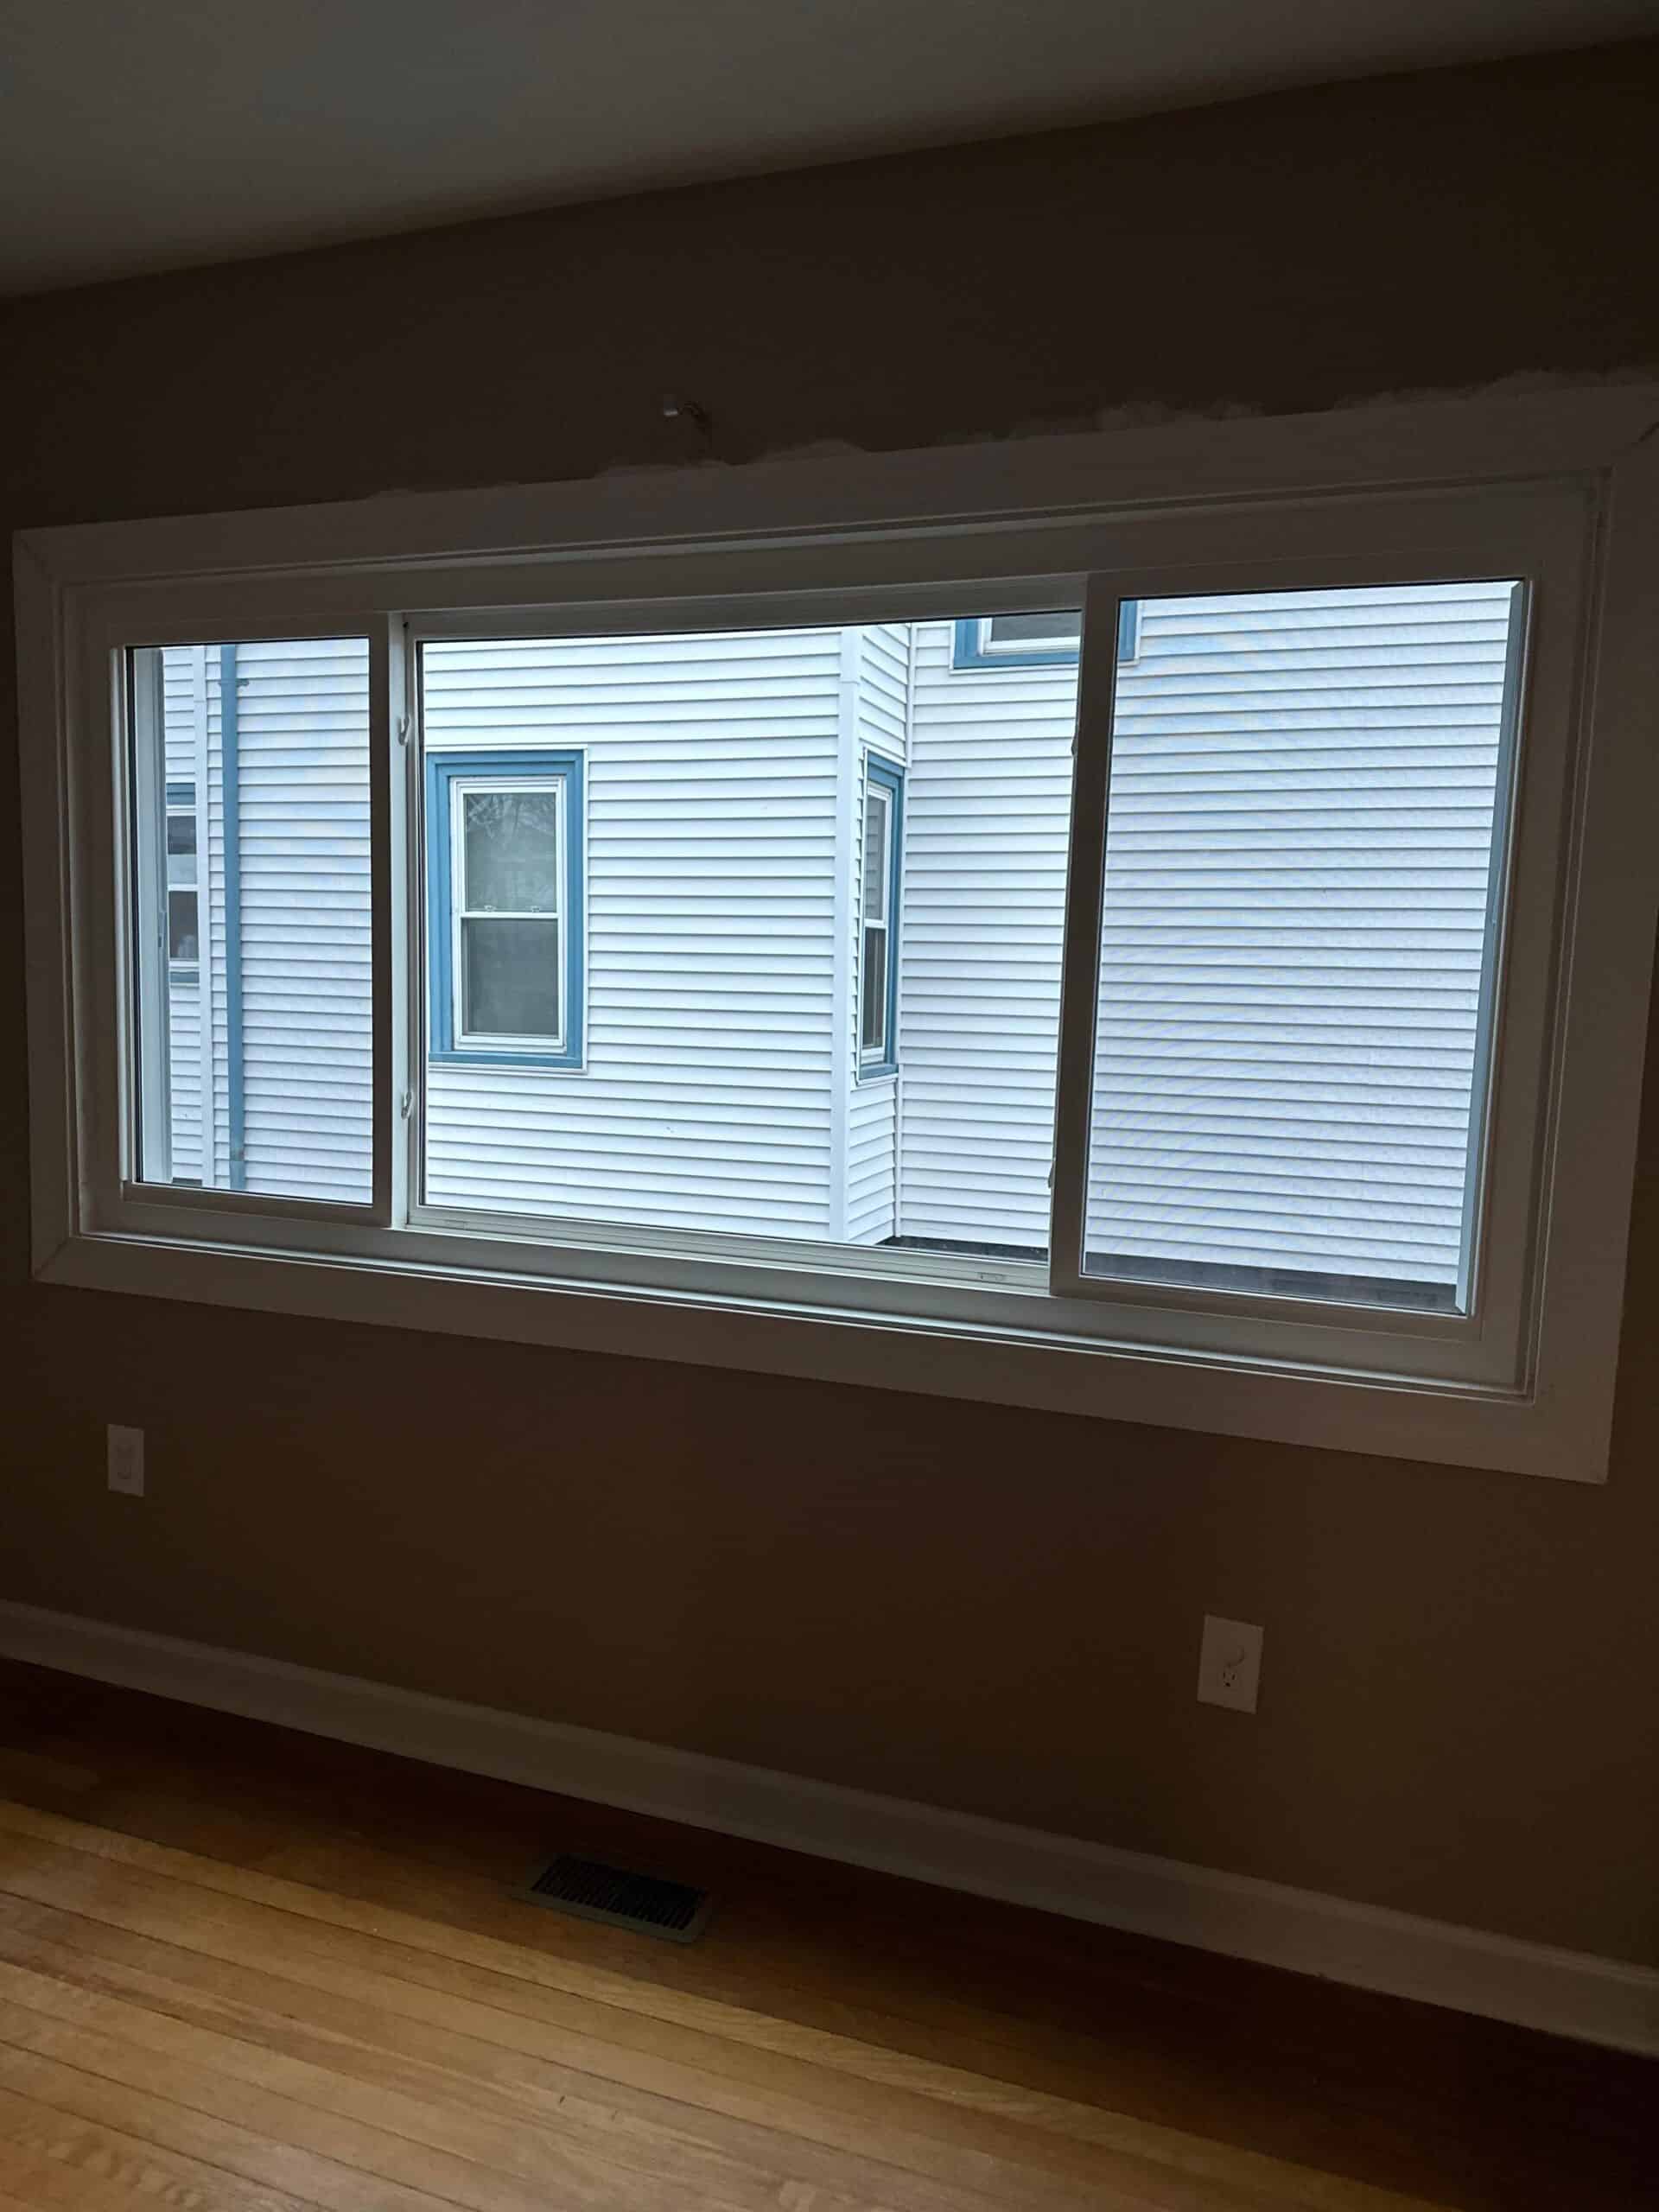 Interior view of a SoftLite window installed in a home